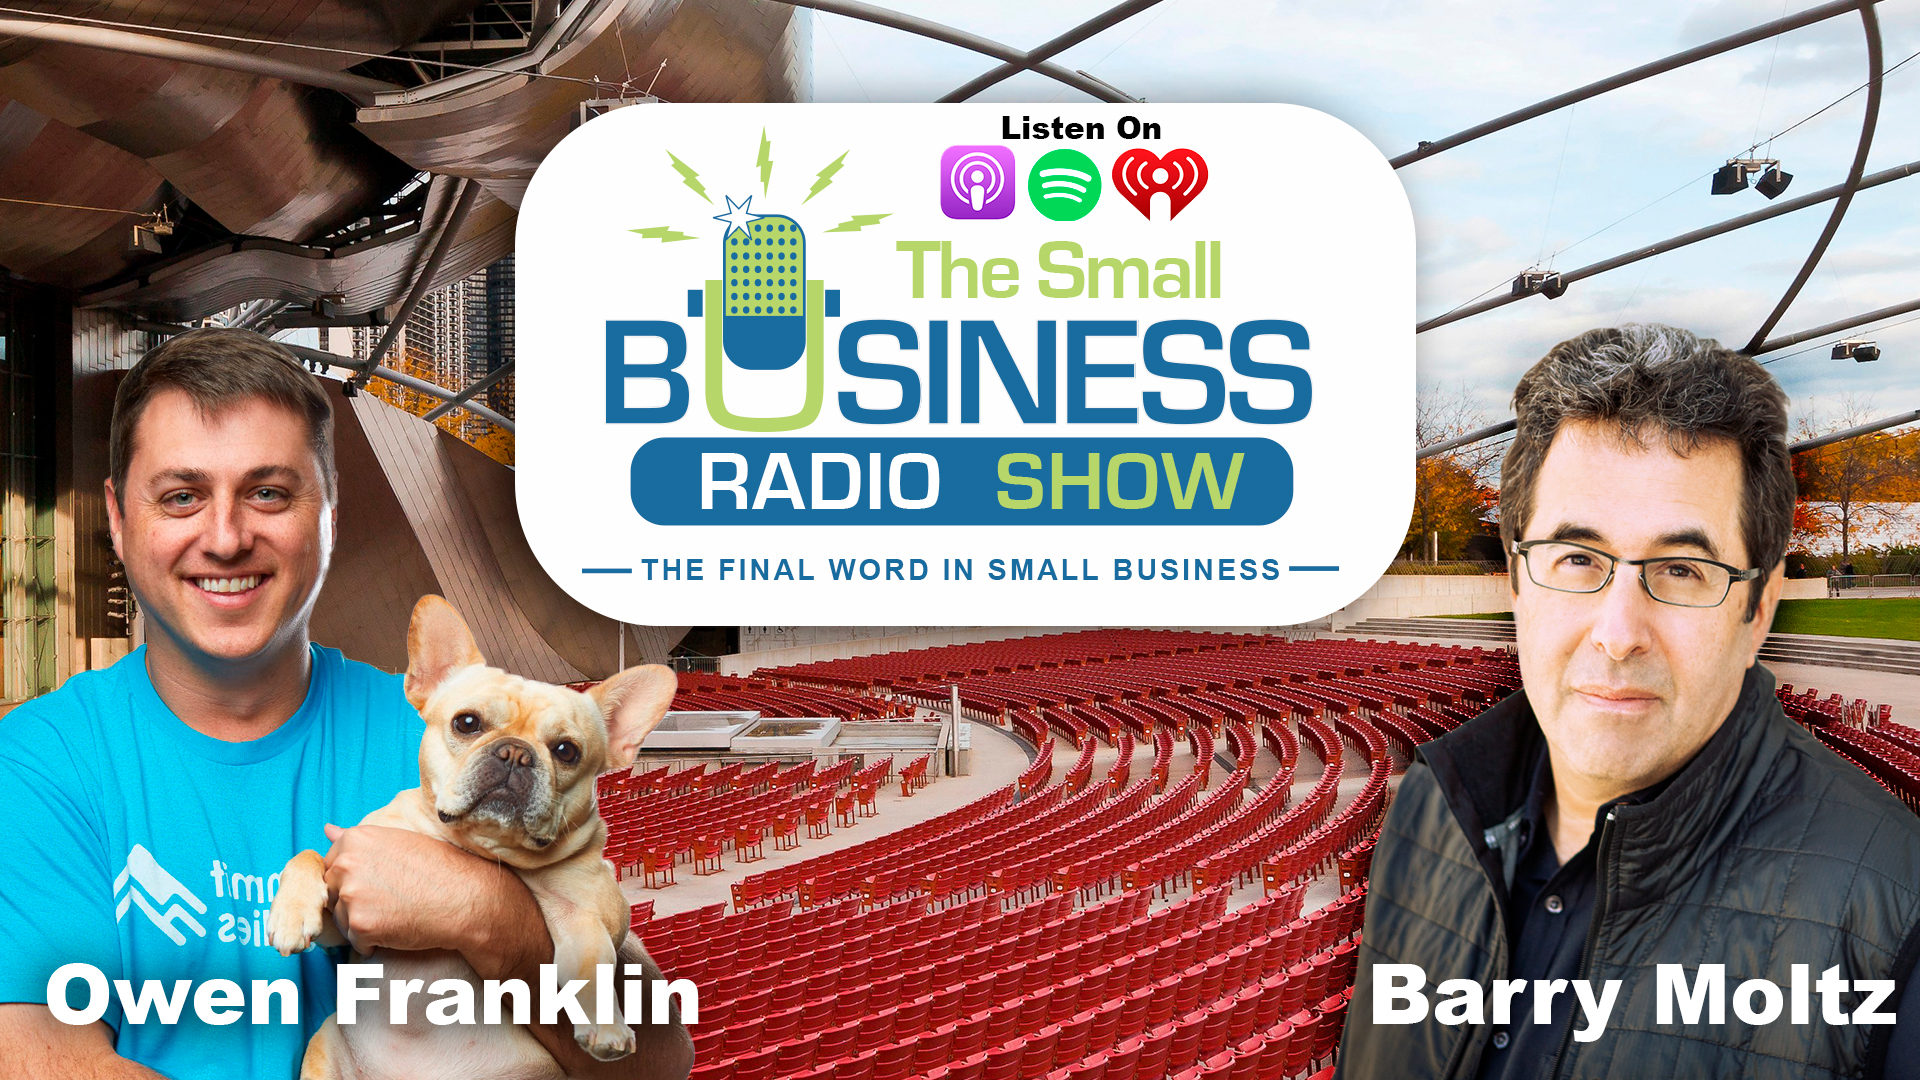 Owen Franklin on The Small Business Radio Show